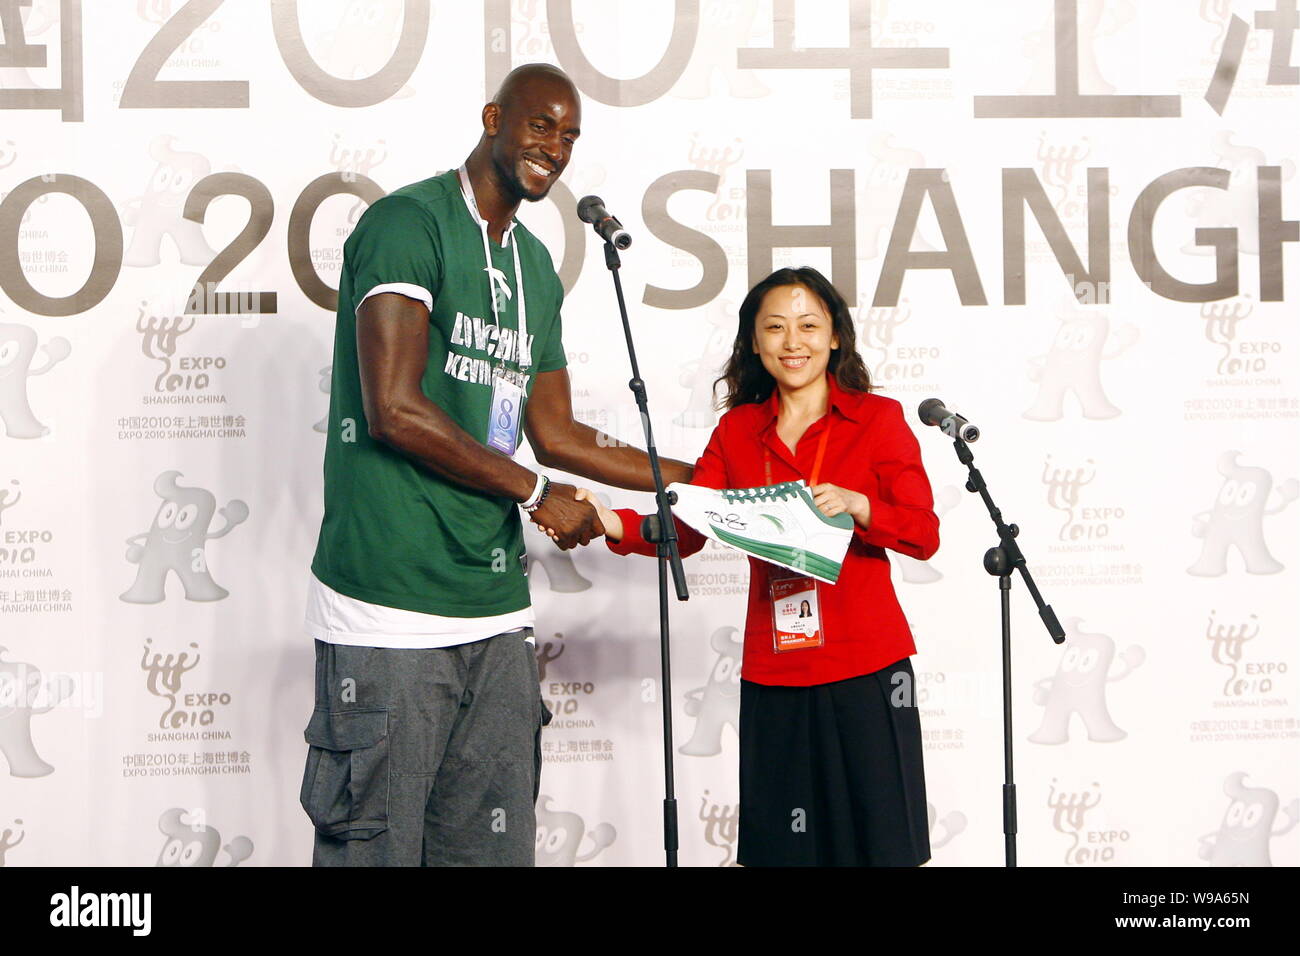 NBA basketball player Kevin Garnett of the Boston Celtics shakes hands with a Chinese foundation representative after presenting her a pair of sneaker Stock Photo